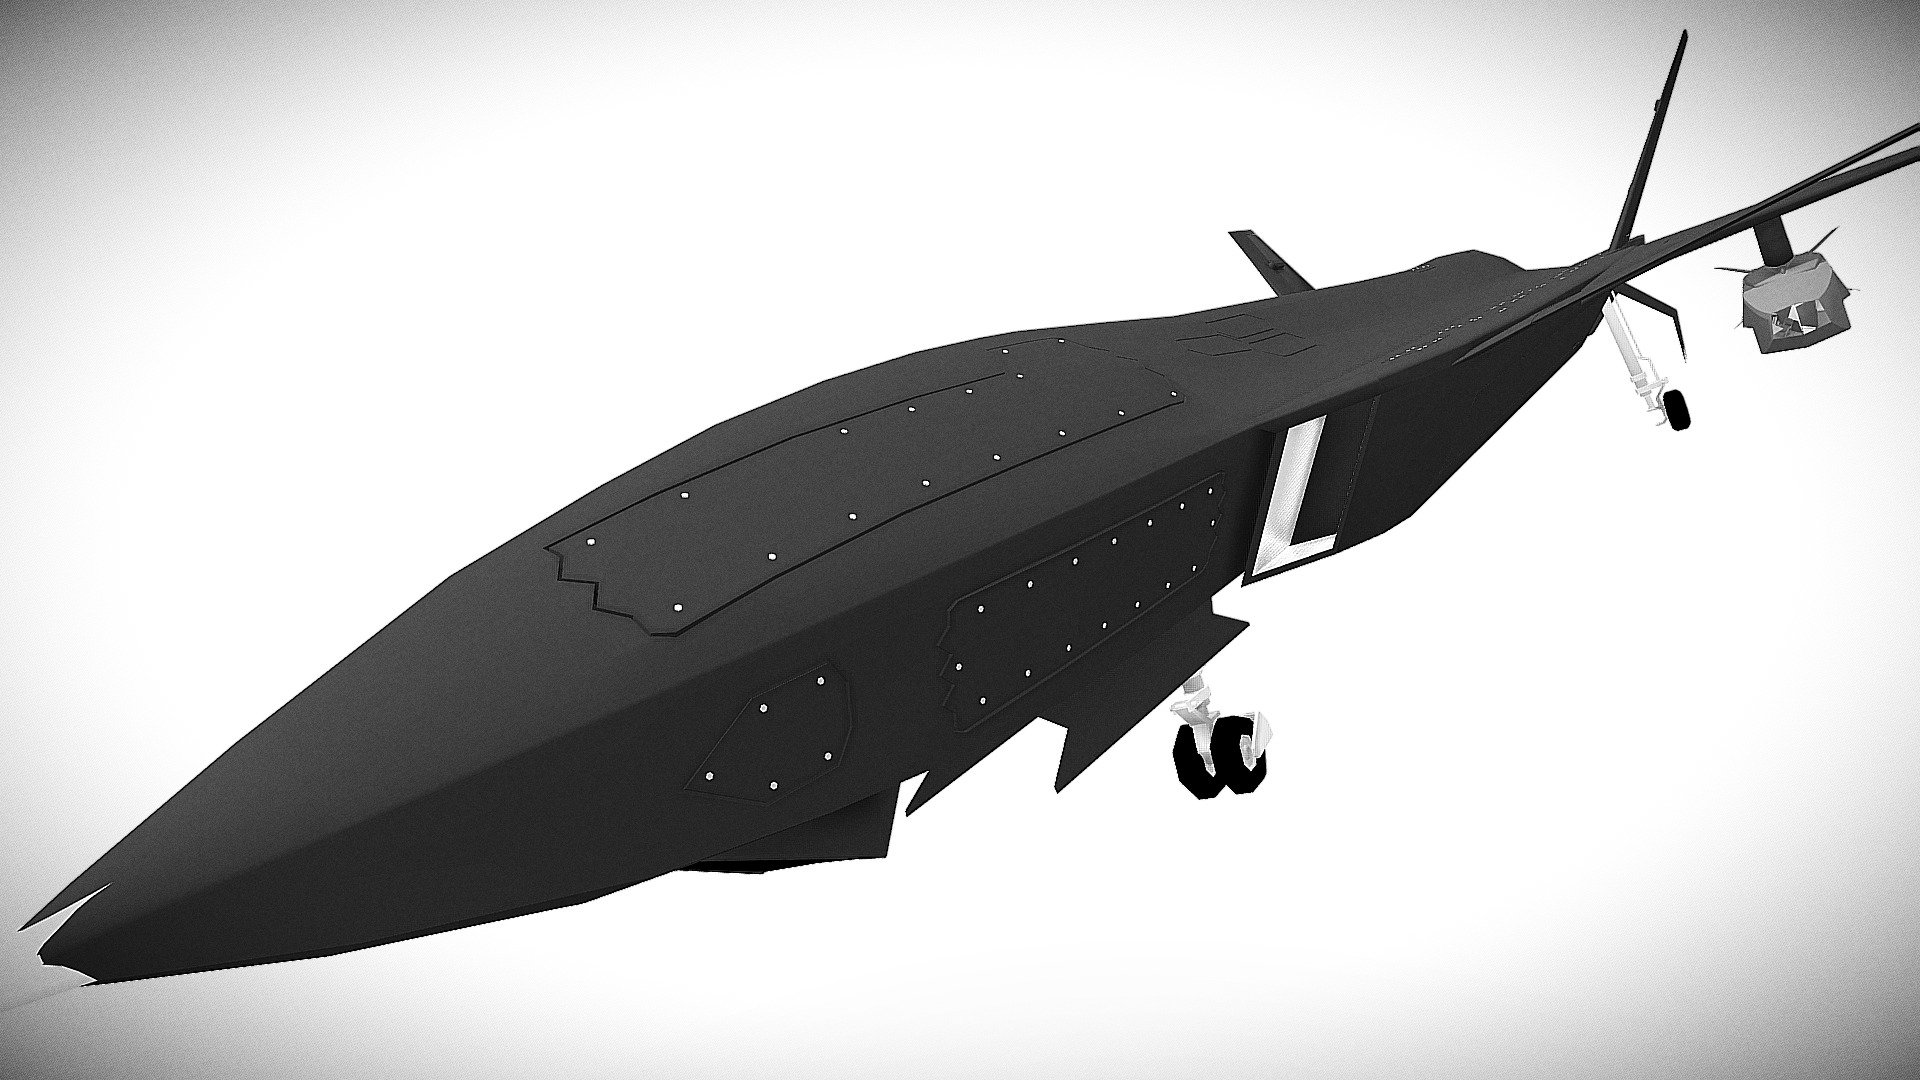 To Buy this Low Poly Model: https://www.artstation.com/a/22919554
Low Poly
Feel free to contact for cooperations.
Low poly MIUS Kizilelma from the well known aircraft producer for the military BaykarTech.

Mius Kizilelma will revolutionize after Bayraktar tb-2 the battlefield 3d model